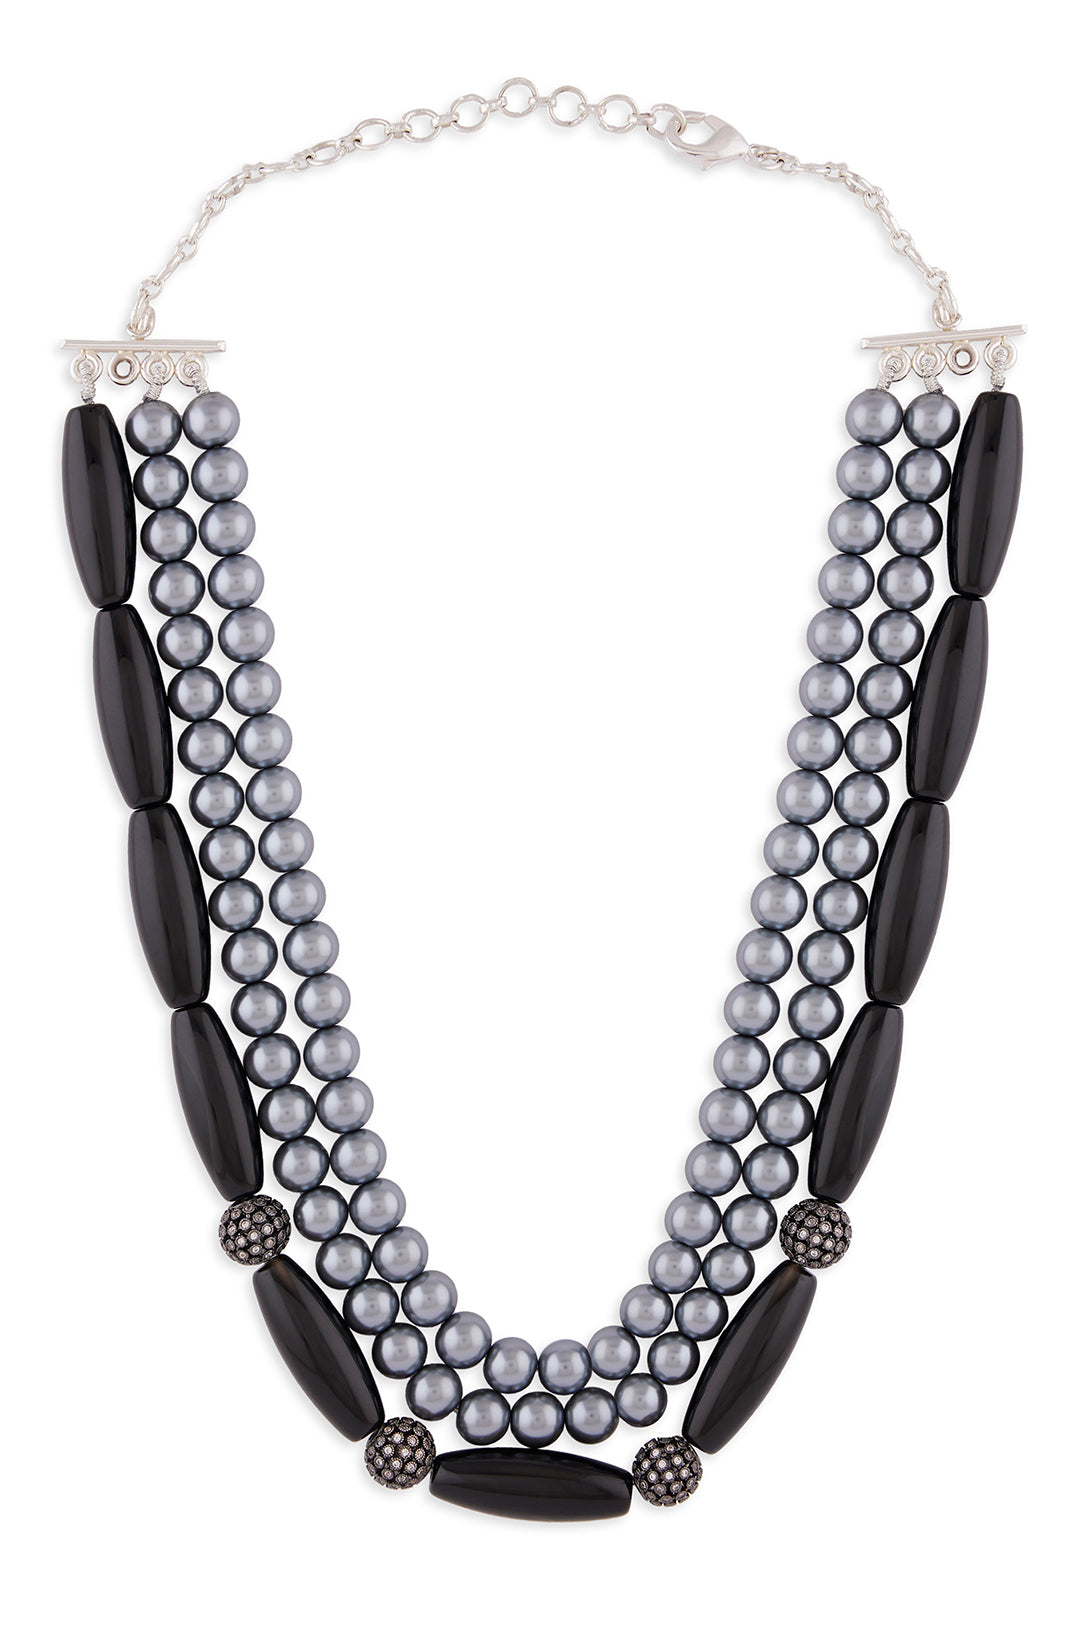 Load image into Gallery viewer, Black Onyx Layered Necklace With Grey Pearls - Joules by Radhika
